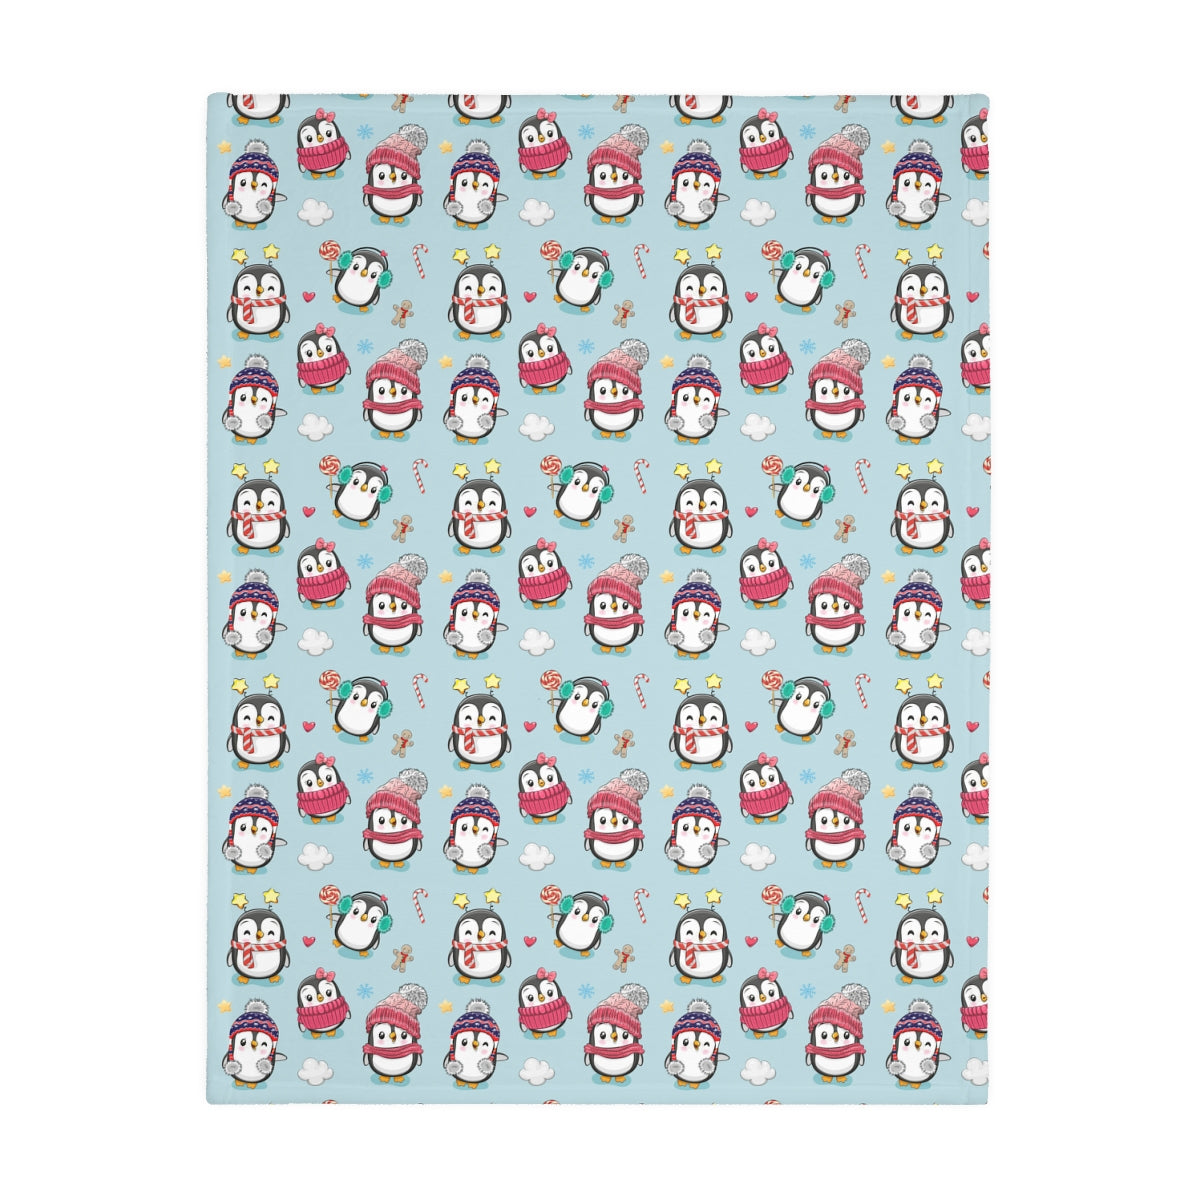 Penguins in Winter Clothes Velveteen Minky Blanket (Two-sided print)